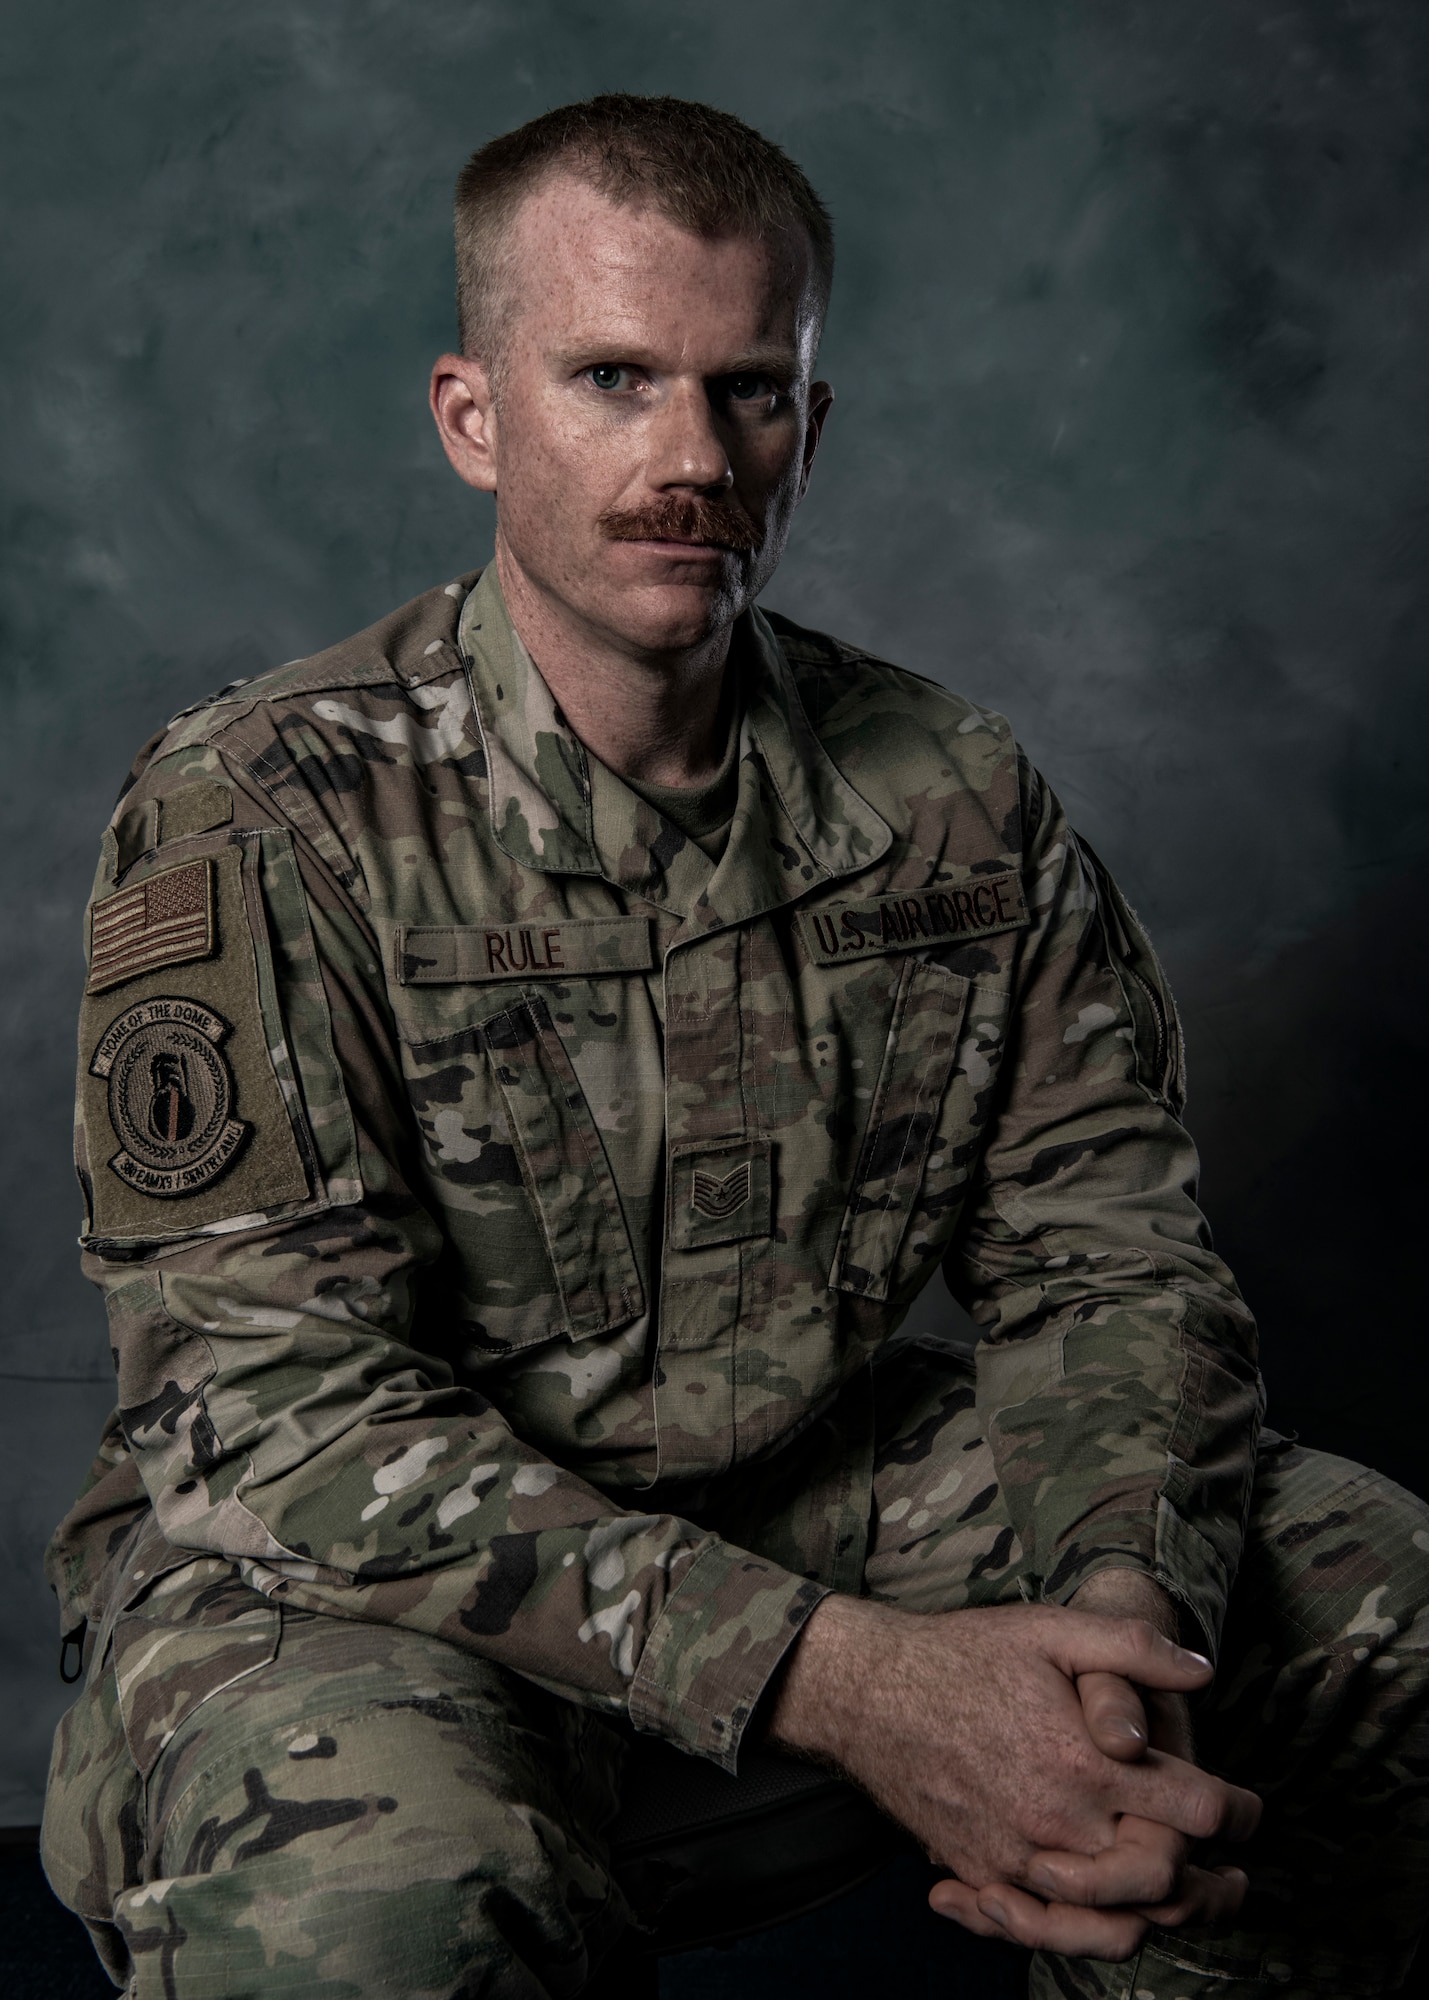 Tech. Sgt. Zachary Rule, 380th Expeditionary Aircraft Maintenance Squadron E-3 Sentry Aircraft Maintenance Unit, poses for a portrait here at Dhafra Air Base, United Arab Emirates, Oct. 15, 2020.